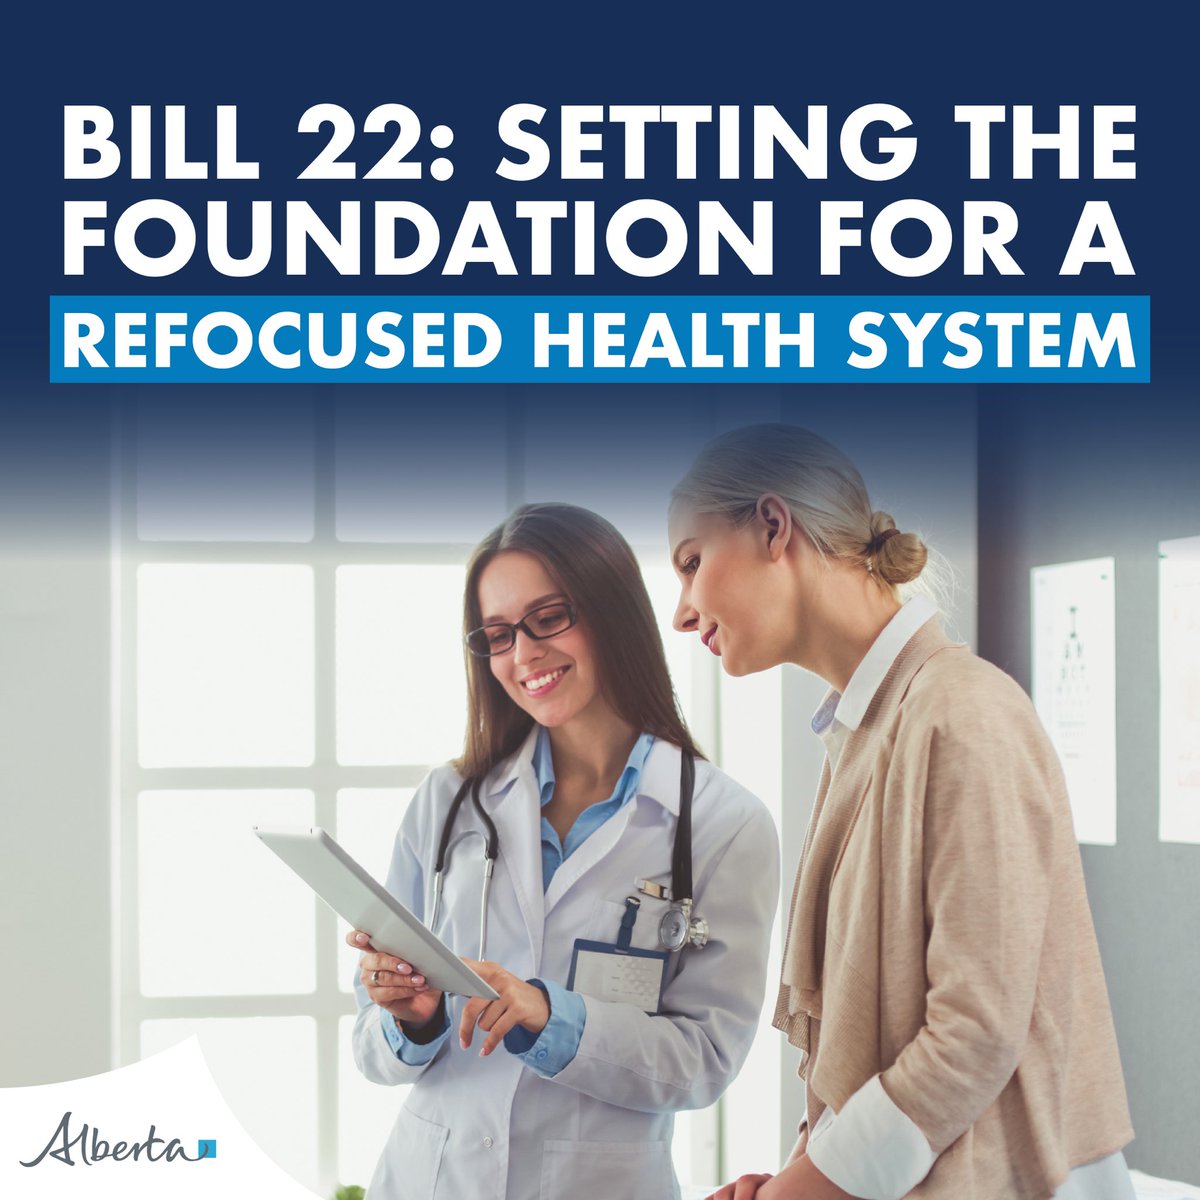 It was an honour to introduce Bill 22 to the Legislature this afternoon. The Health Statutes Amendment Act will enable the transition to an integrated system of four sector-based agencies, including primary care, acute care, continuing care, and mental health and addiction. If